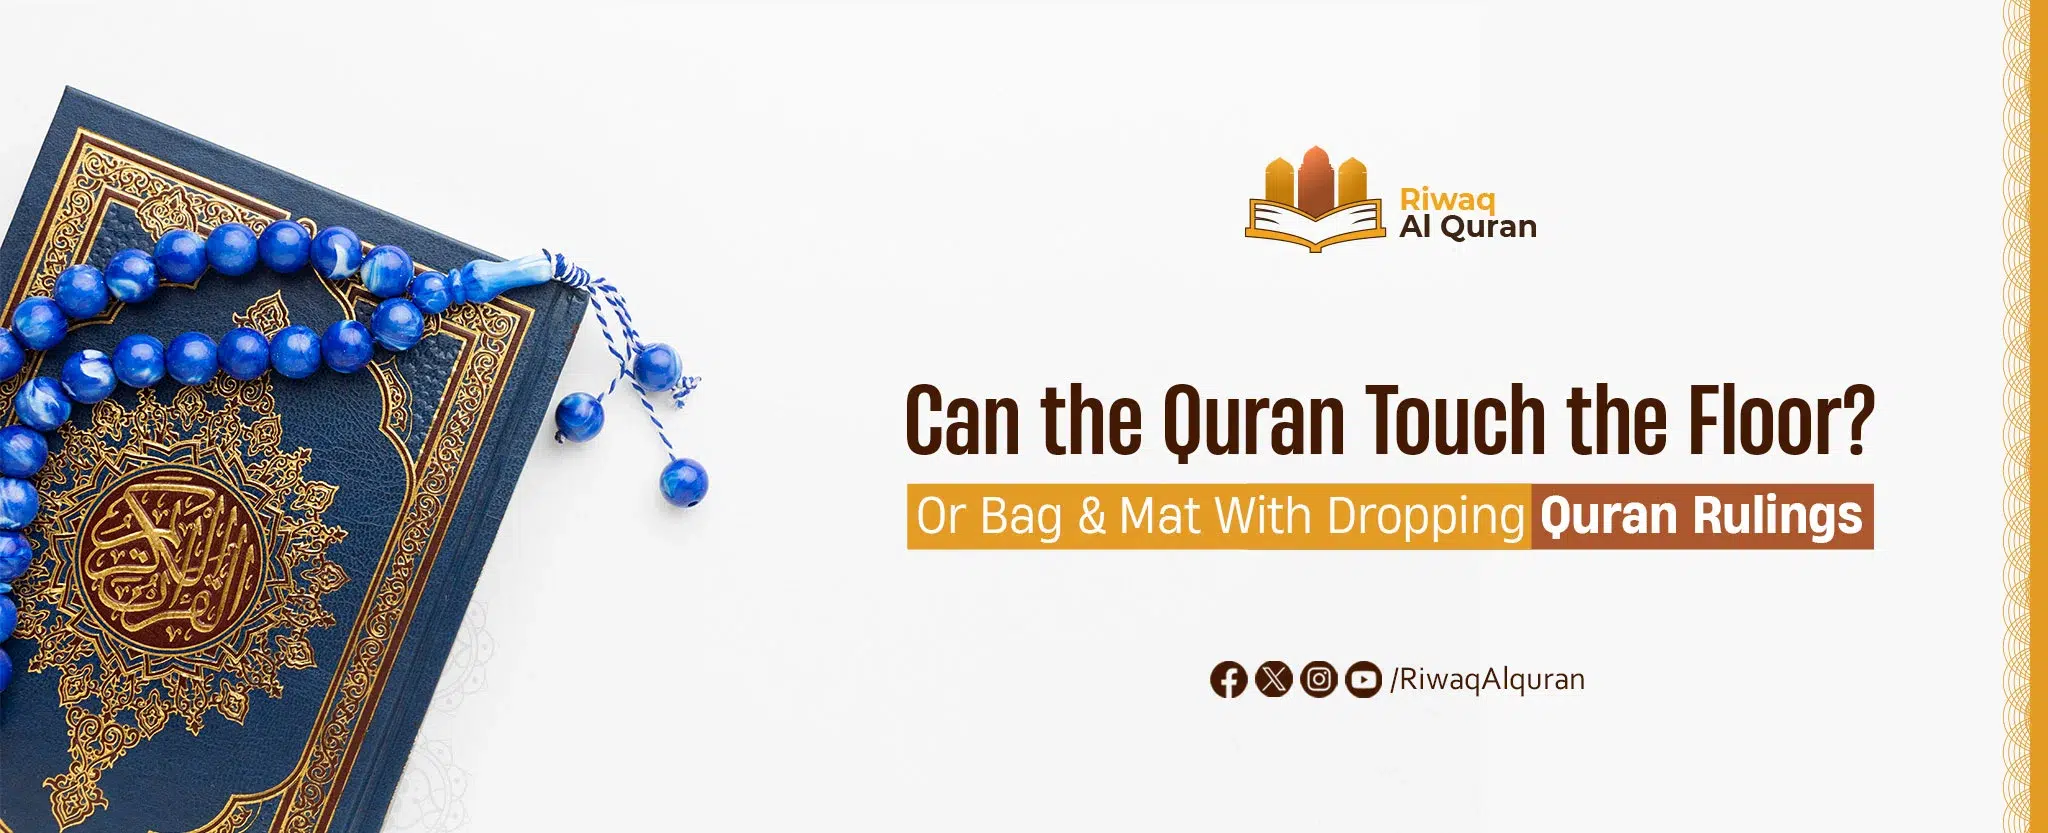 Can the Quran Touch the Floor? Or Bag & Mat With Dropping Quran Rulings